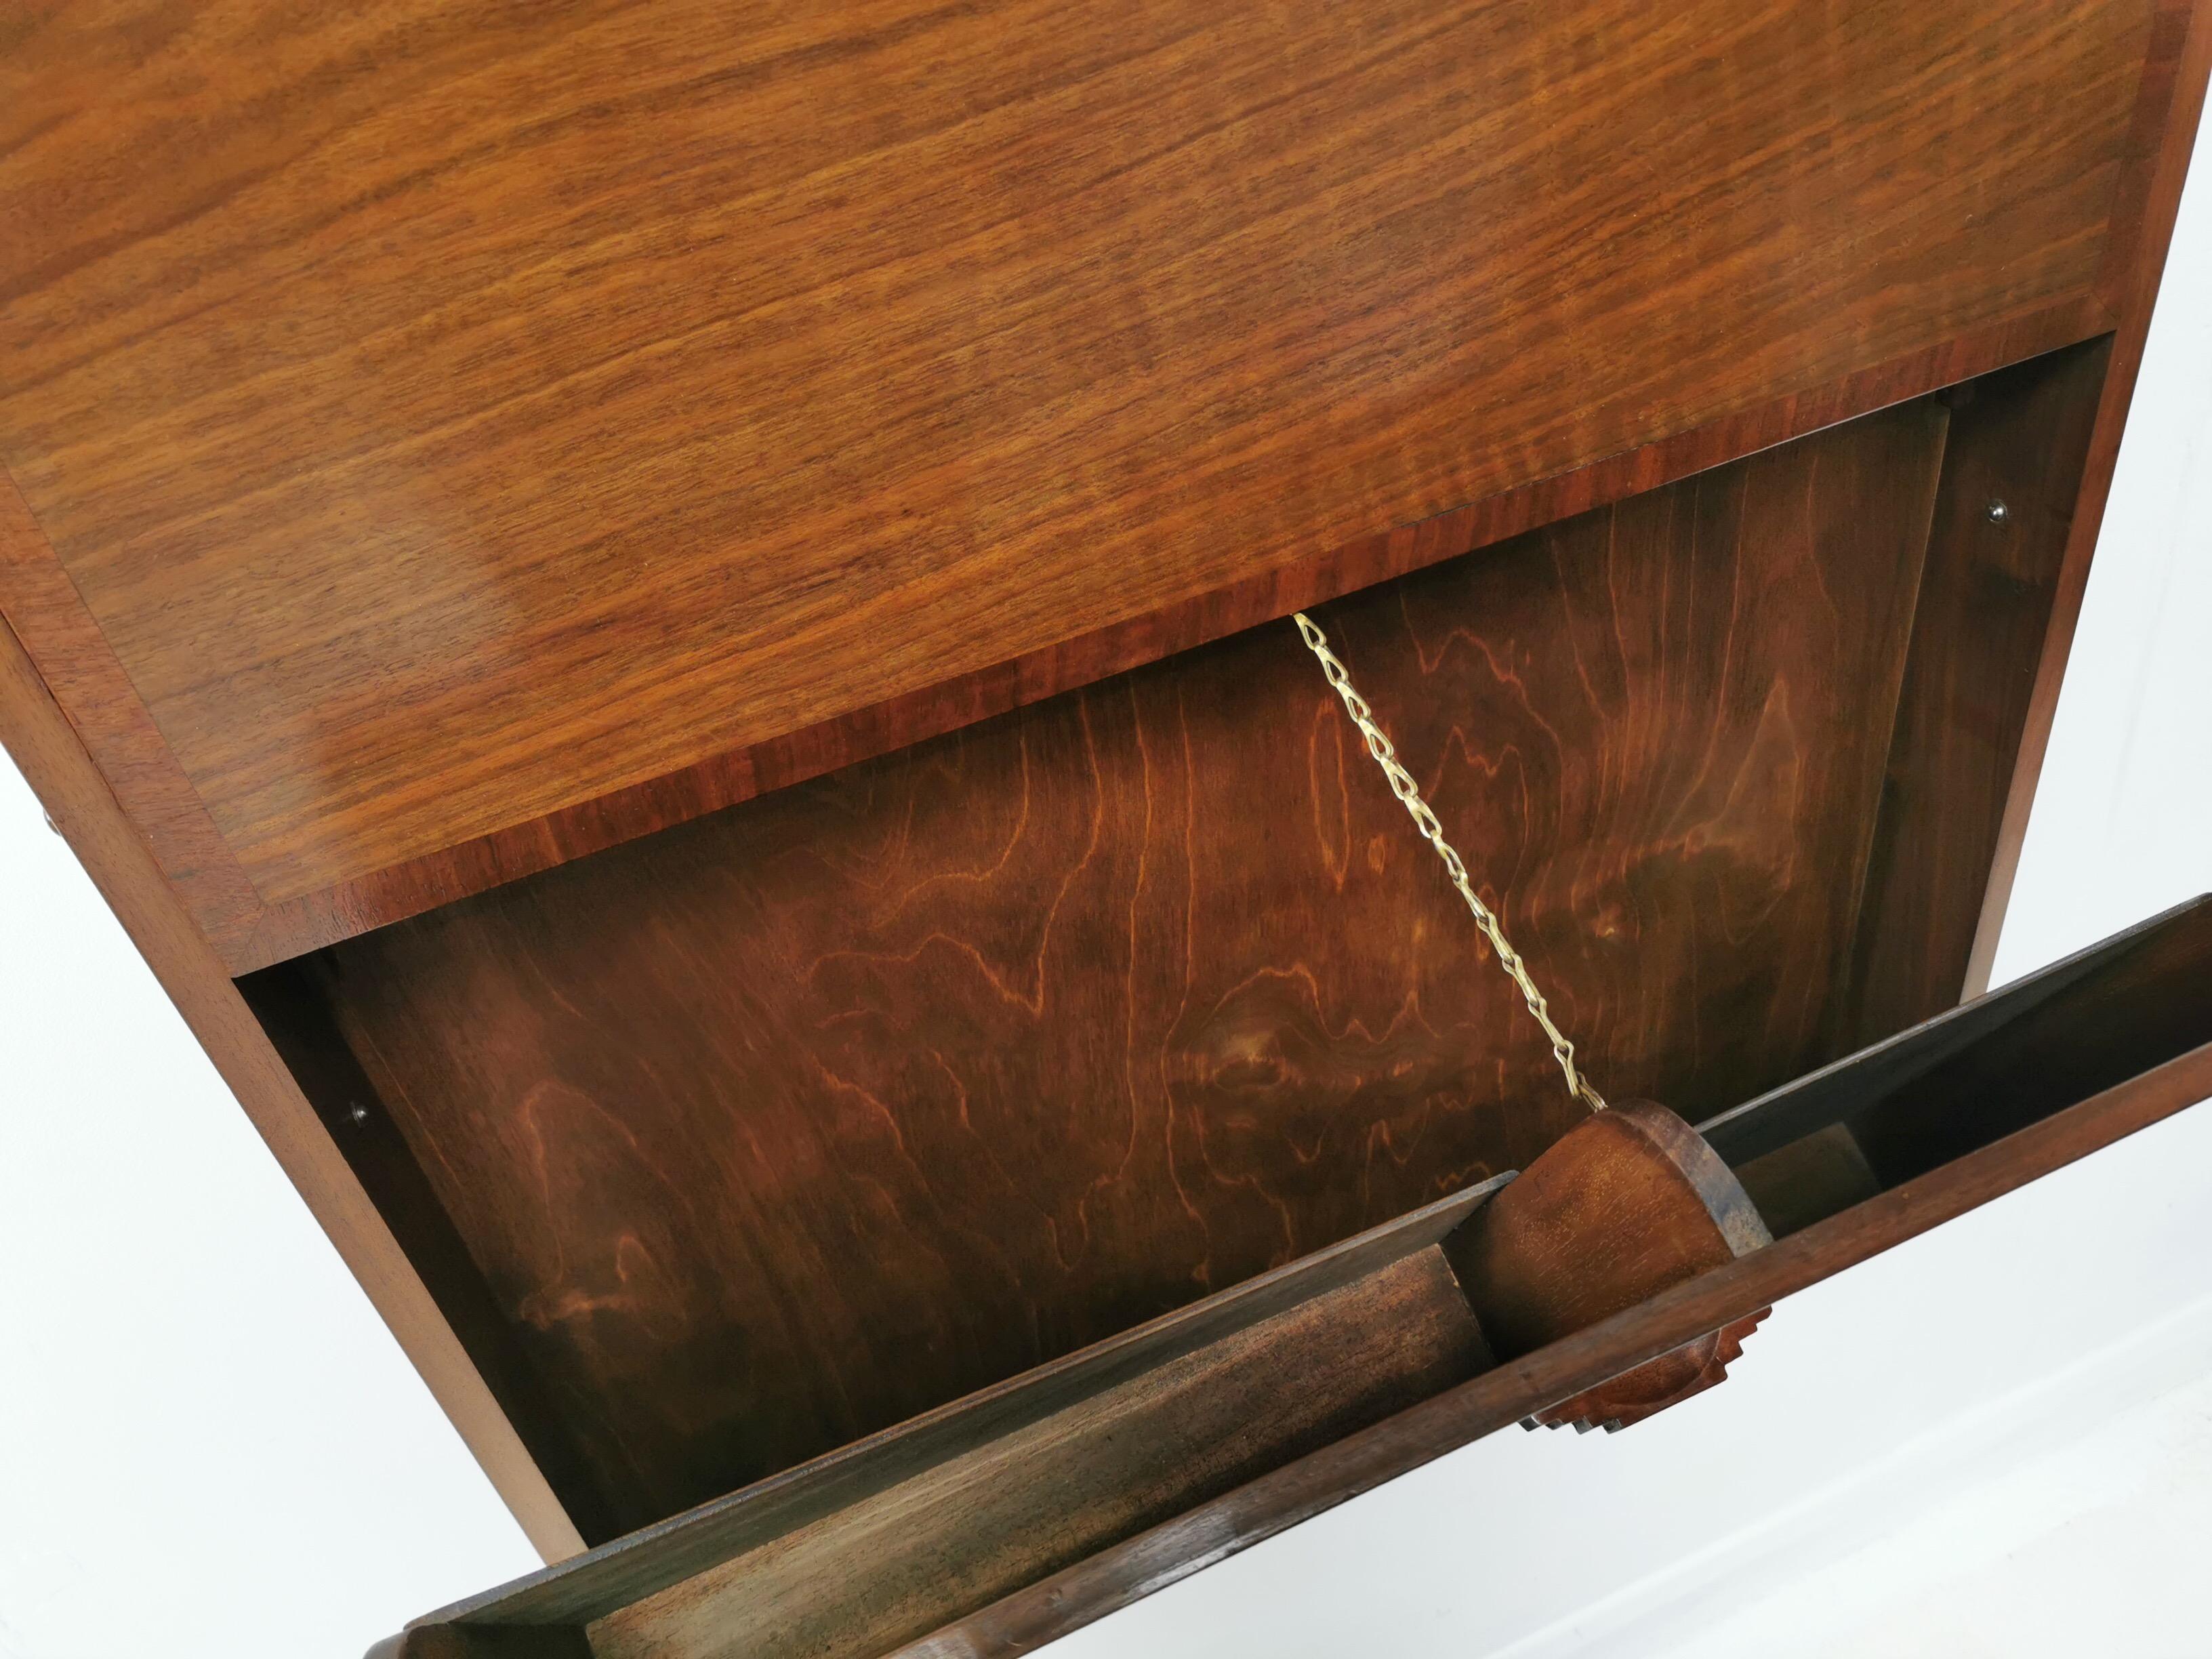 1930s wall desk

This Art Deco, 1930s mahogany compact desk by the Rowley Gallery has a drop-down desk over a hinged folio. Comes complete with original pigeon holes for storage. The desk can be wall-mounted to suit your own space and height